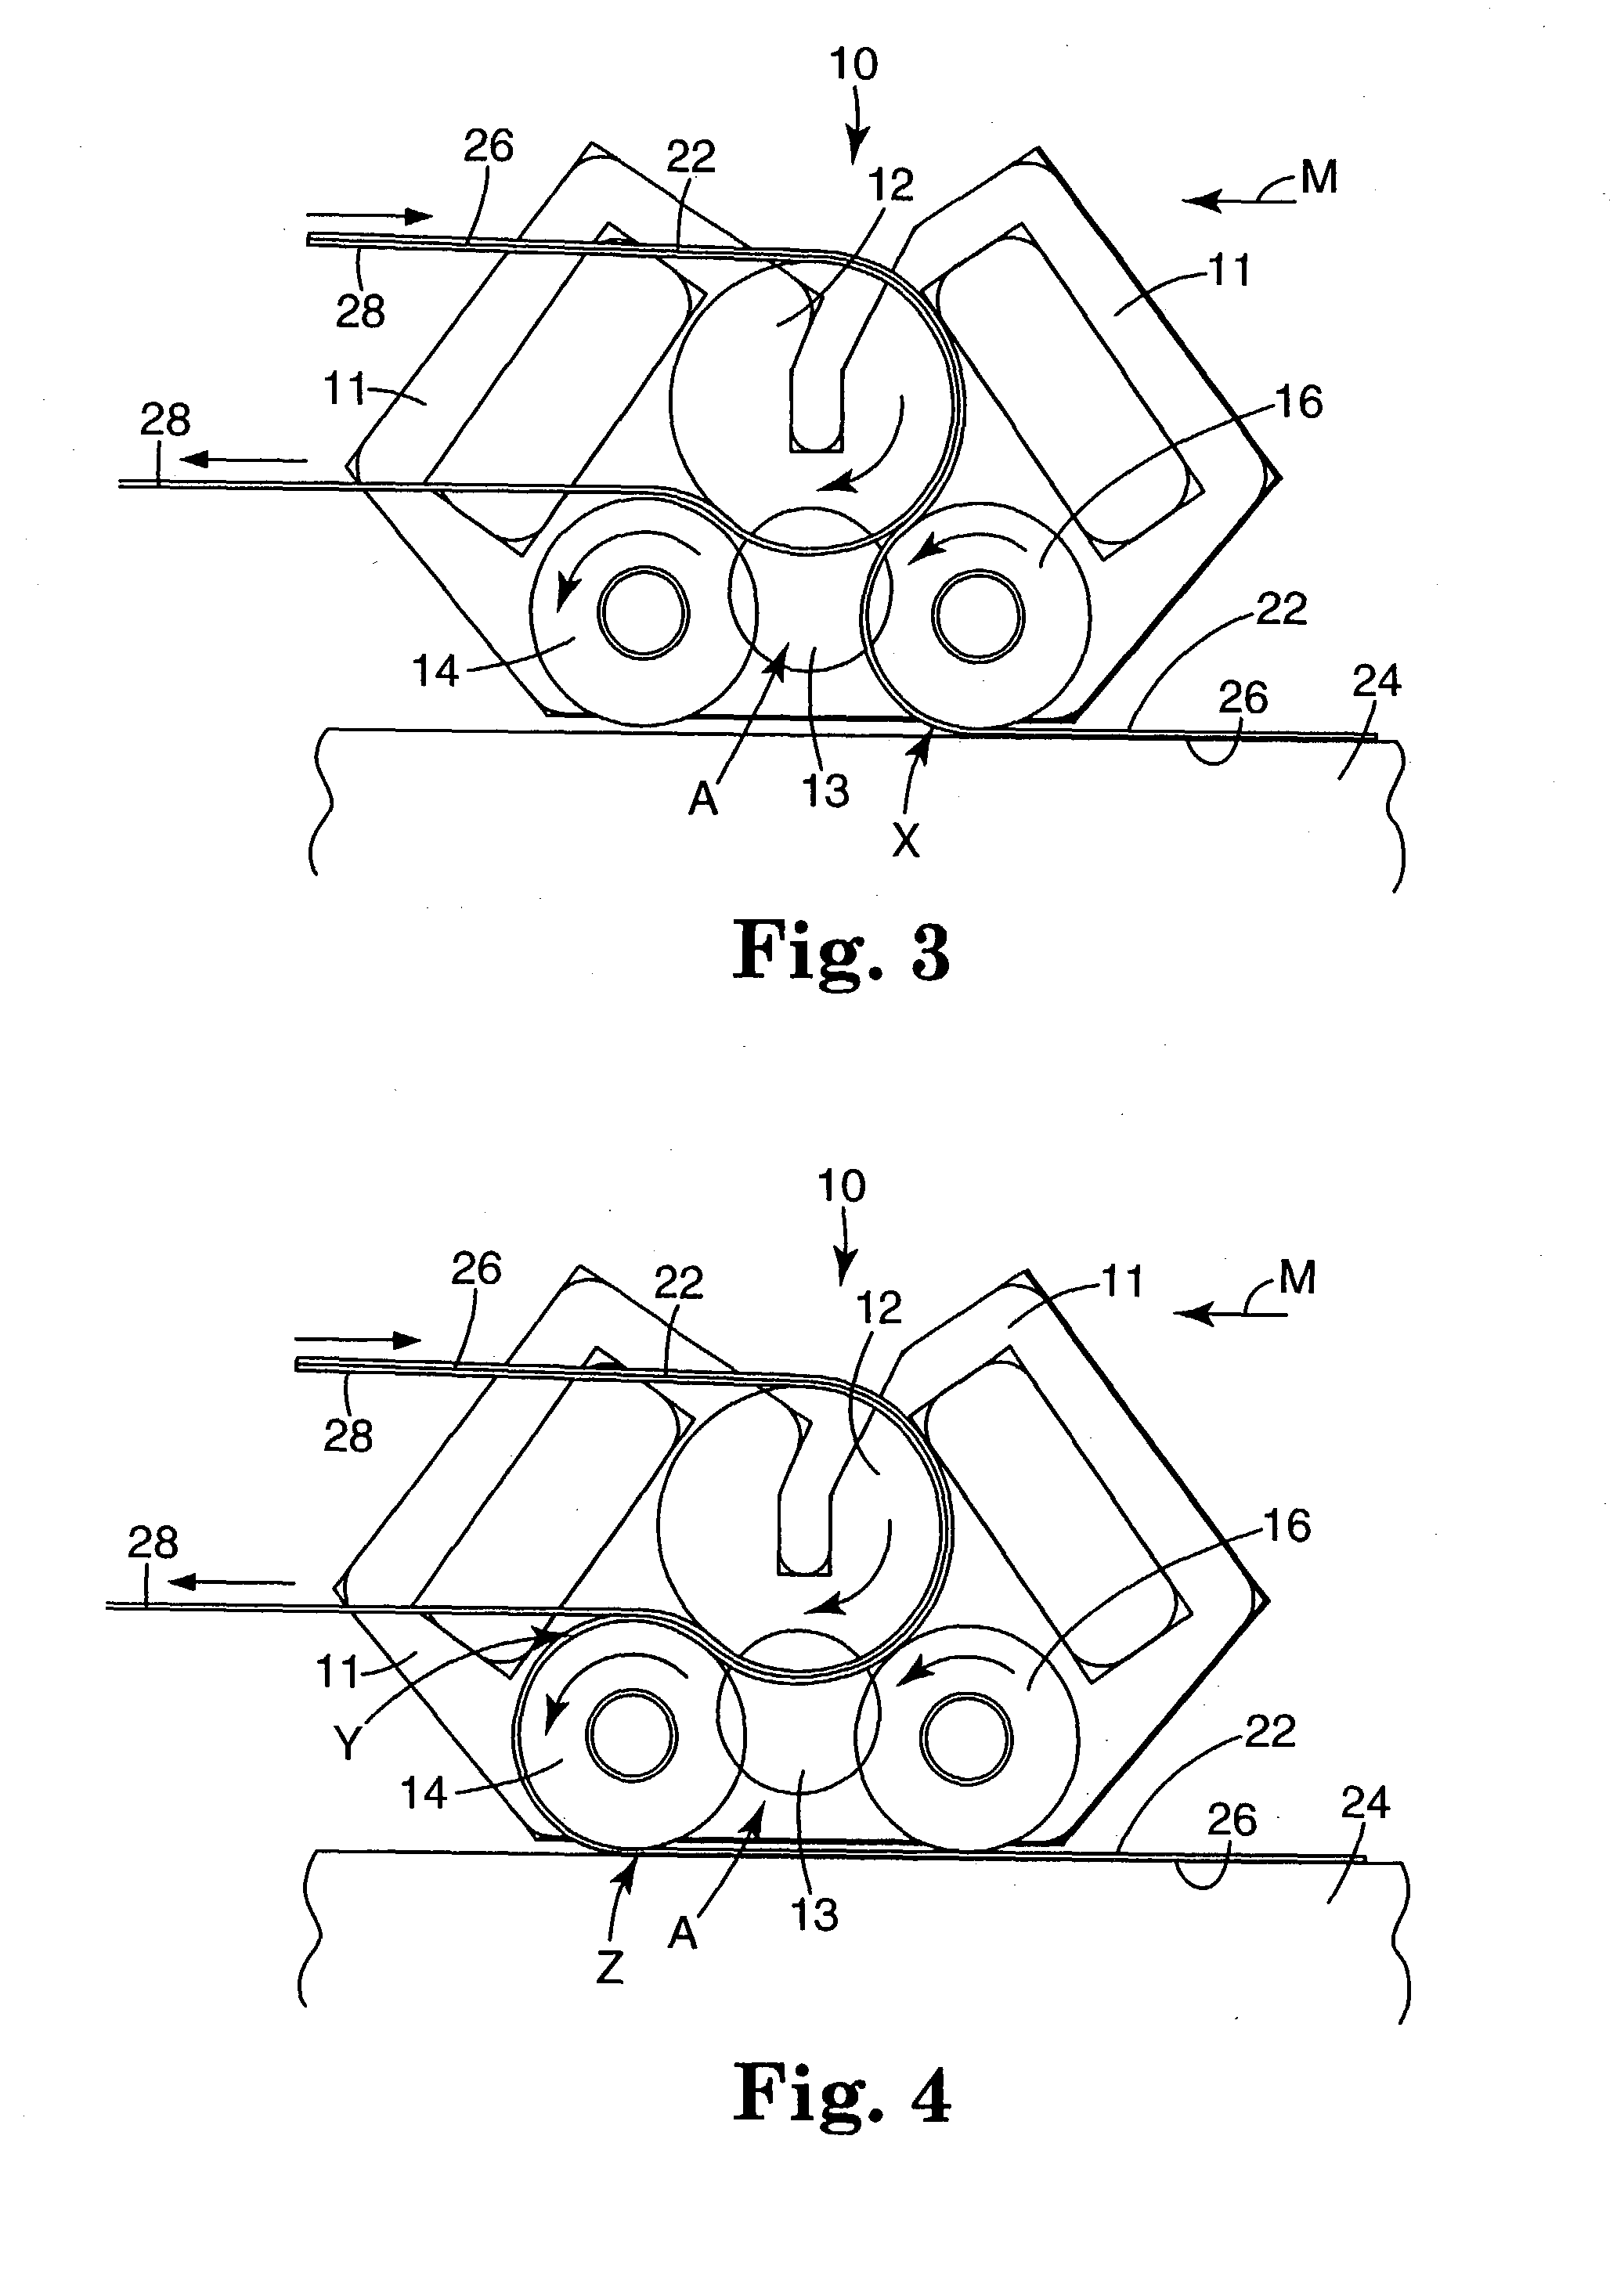 Steered vacuum-assisted laminating apparatus and methods of use